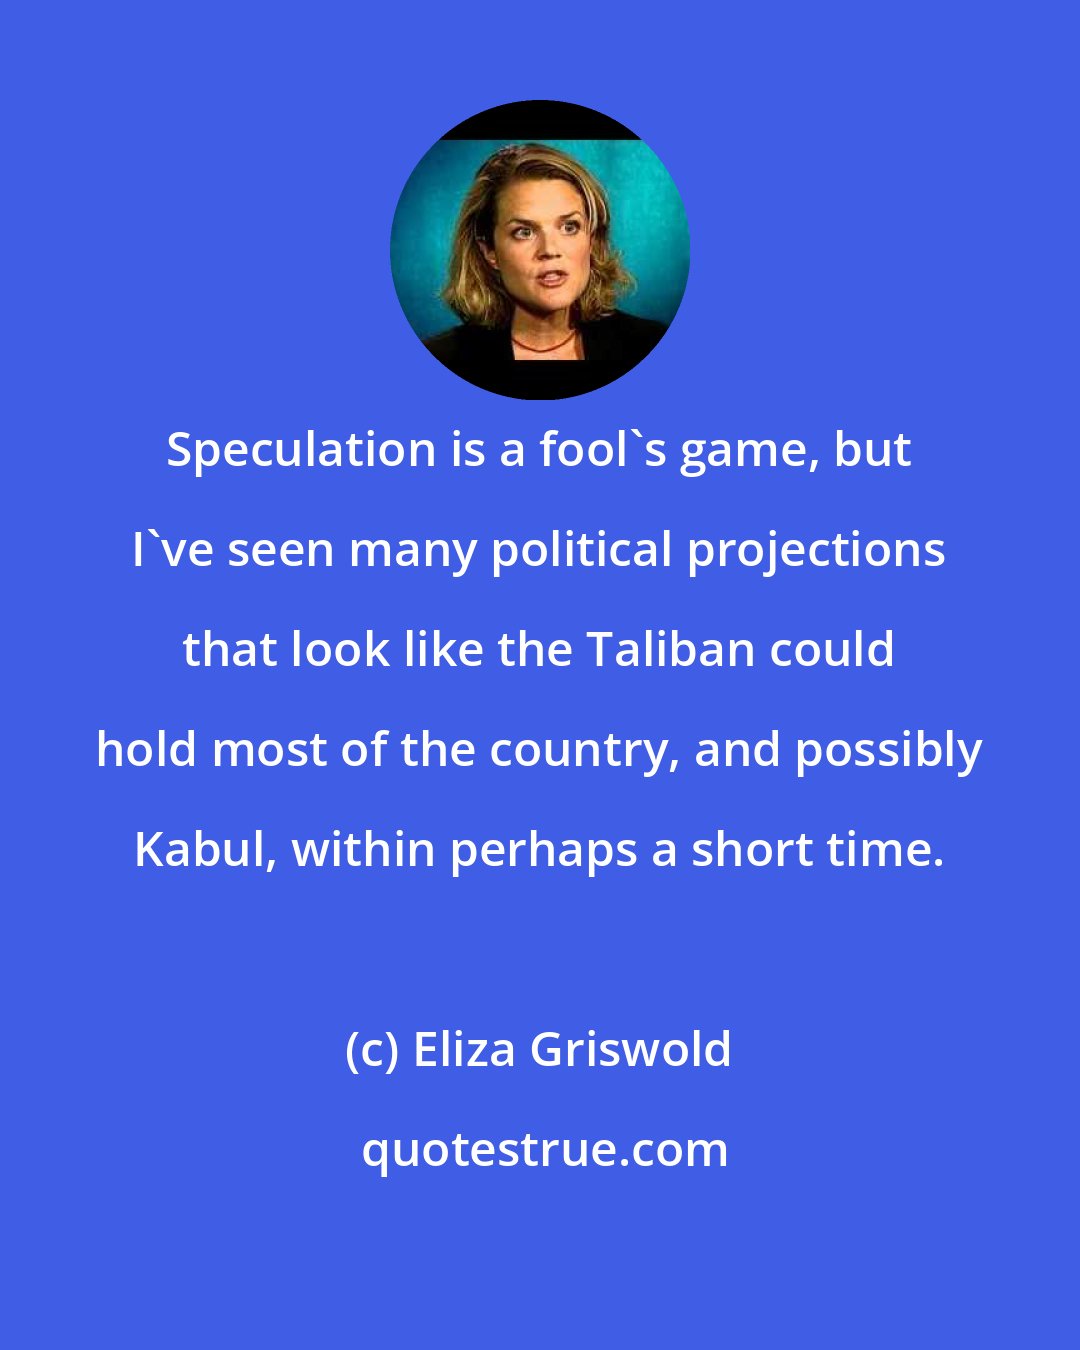 Eliza Griswold: Speculation is a fool's game, but I've seen many political projections that look like the Taliban could hold most of the country, and possibly Kabul, within perhaps a short time.